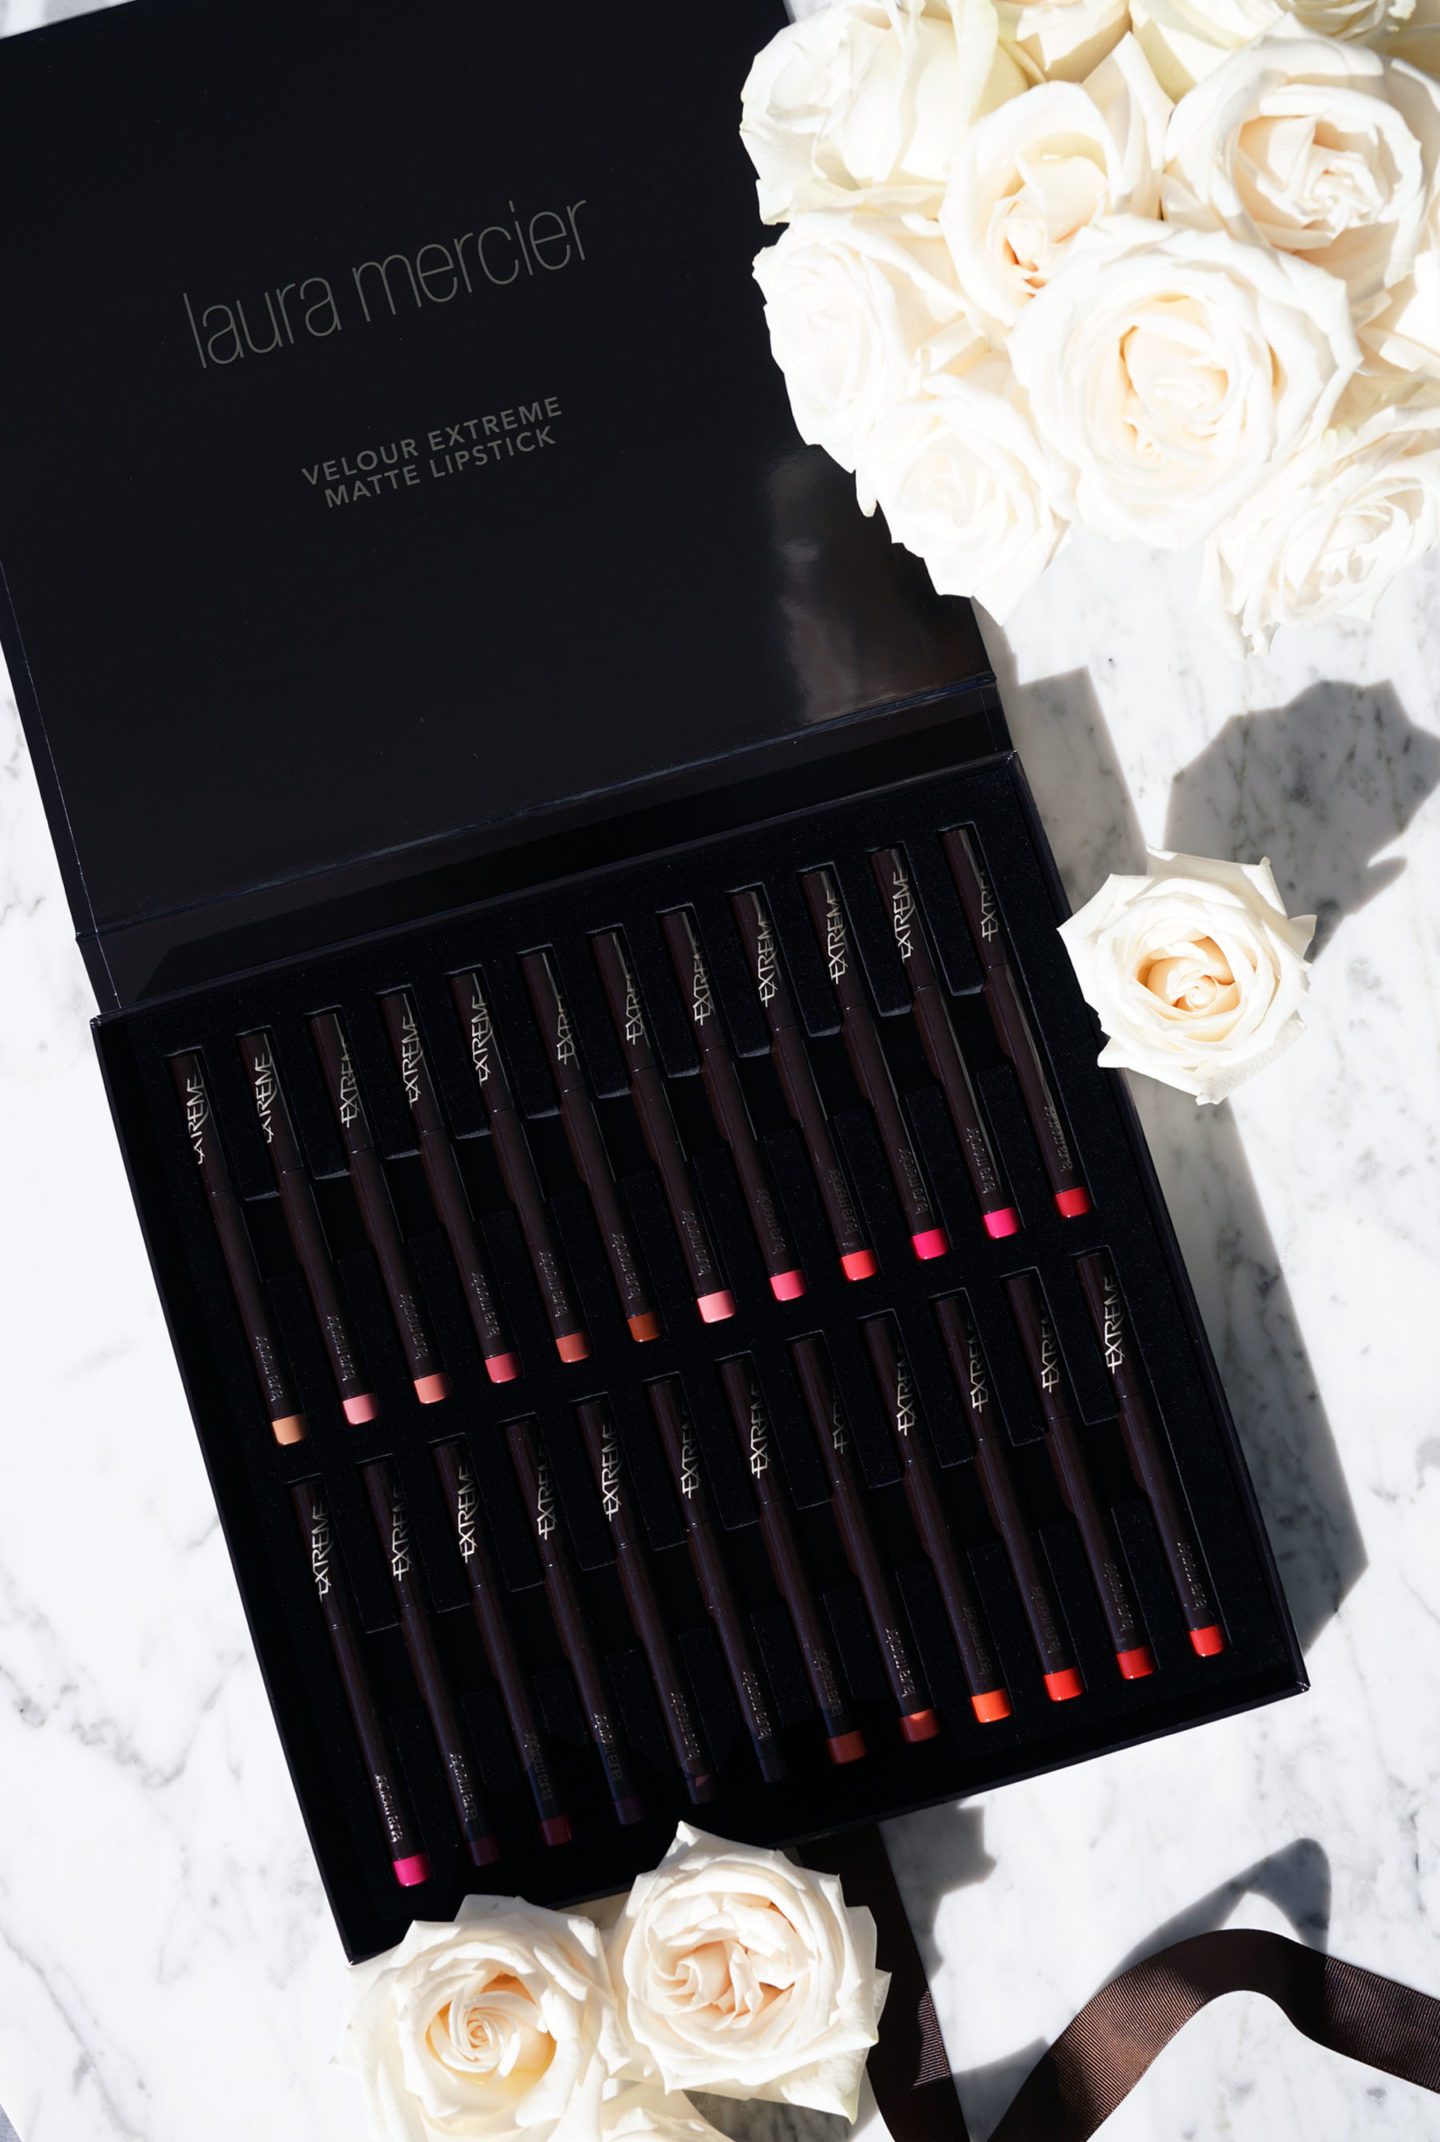 Laura Mercier Velour Extreme Matte Lipstick Review and Swatches | The Beauty Look Book